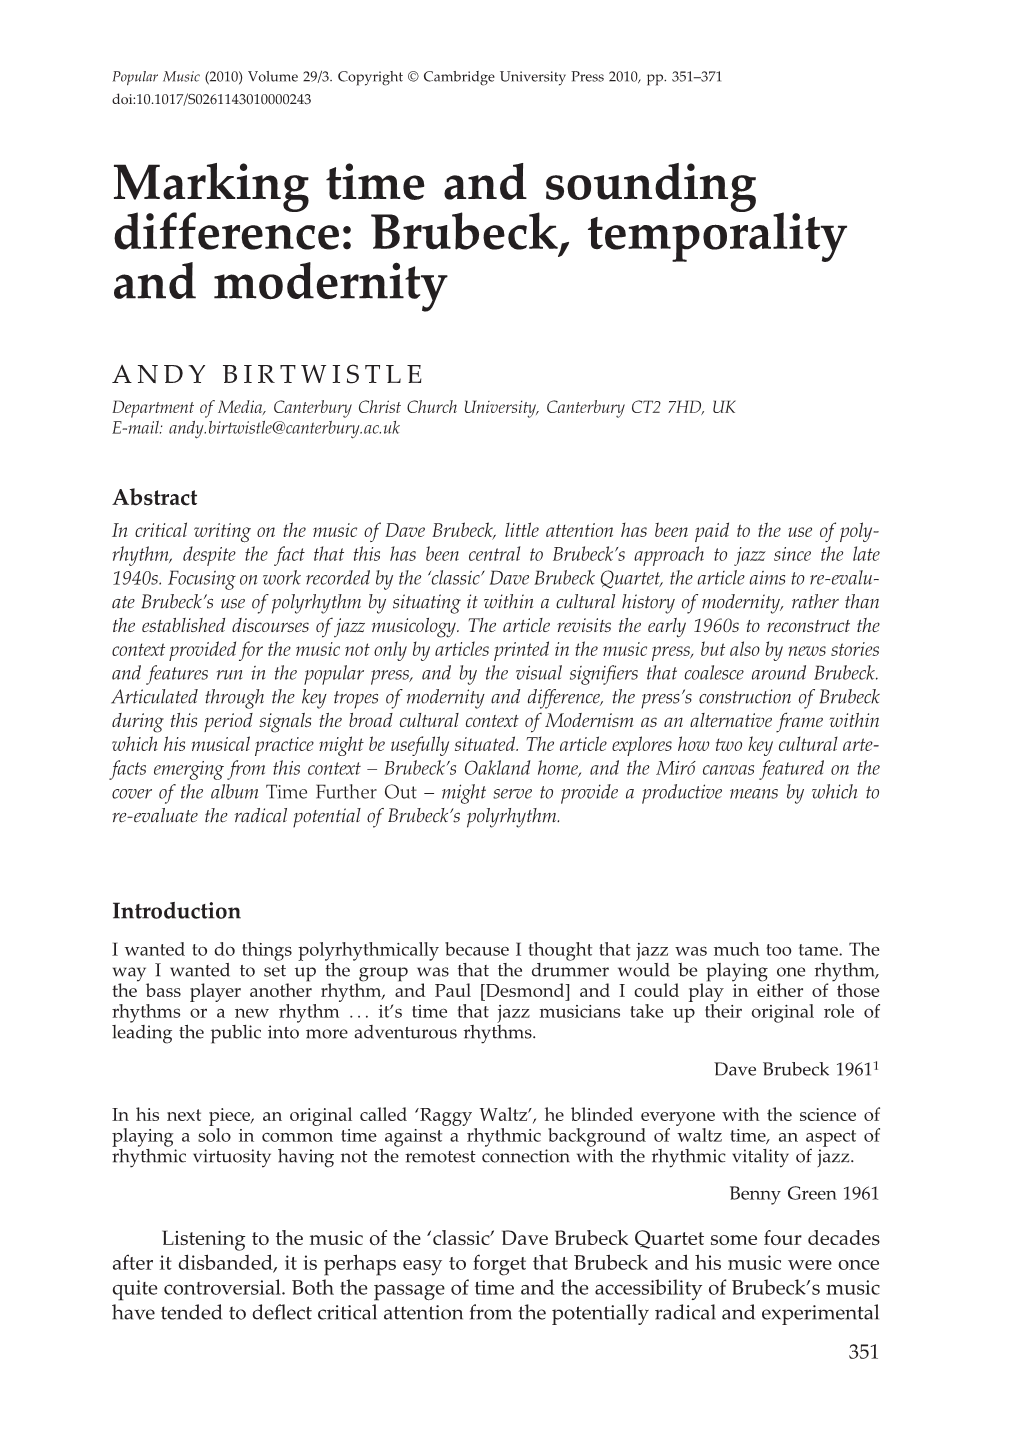 Marking Time and Sounding Difference: Brubeck, Temporality and Modernity